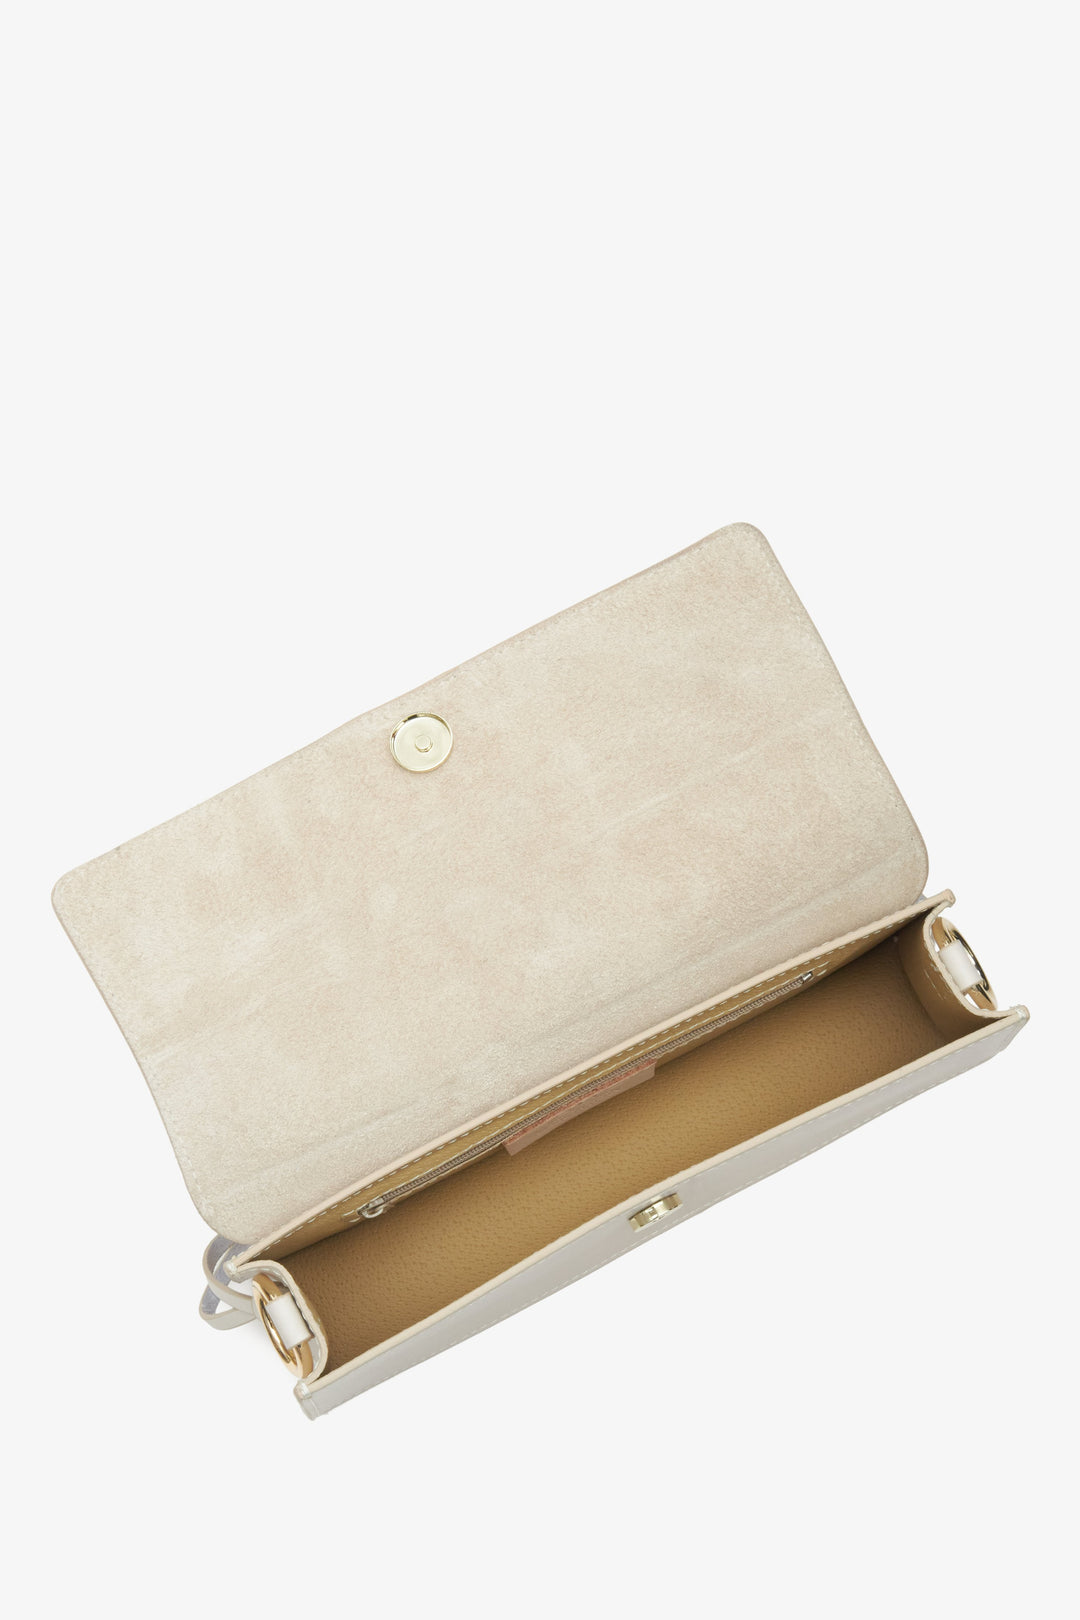 Women's cream beige leather handbag - a close-up on the main compartment.